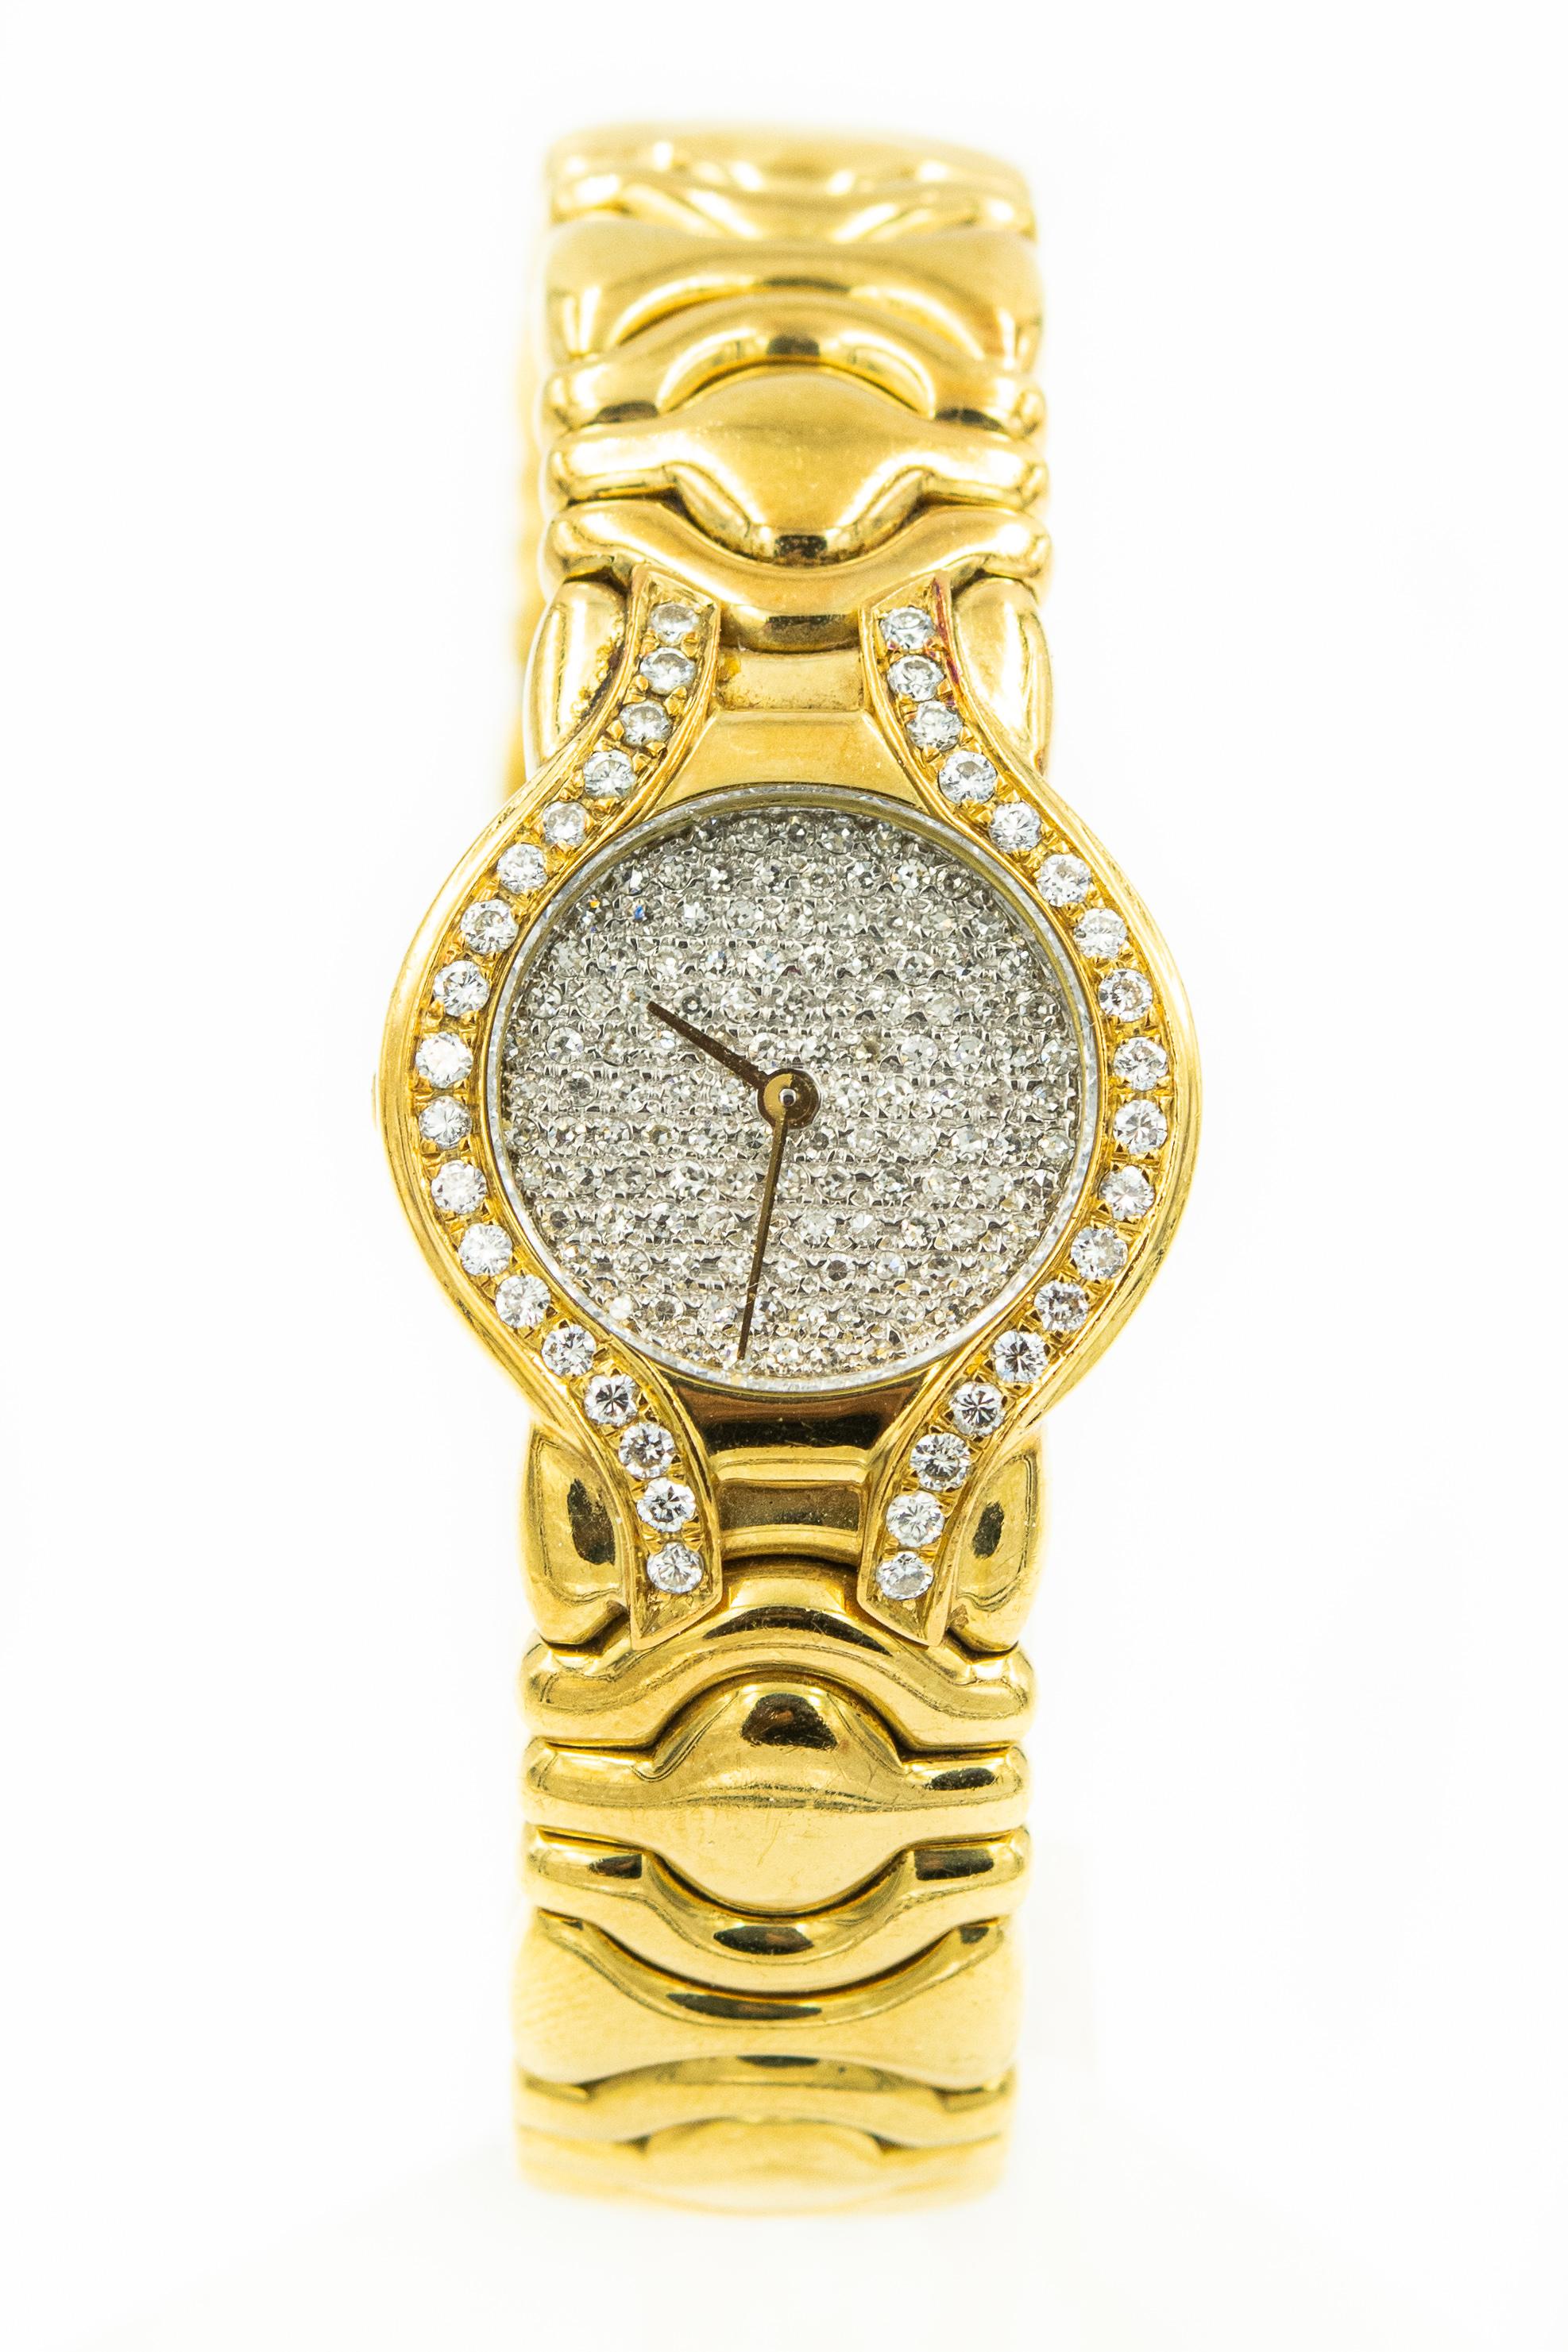  Ladies 18k Yellow Gold Watch with Diamond Face and Bezel The circular dial pavé-set with single-cut diamonds, open ended bangle composed of interlocking geometric links, accented by brilliant-cut diamonds on the bezel.  Made it Italy.
Weight 66.7